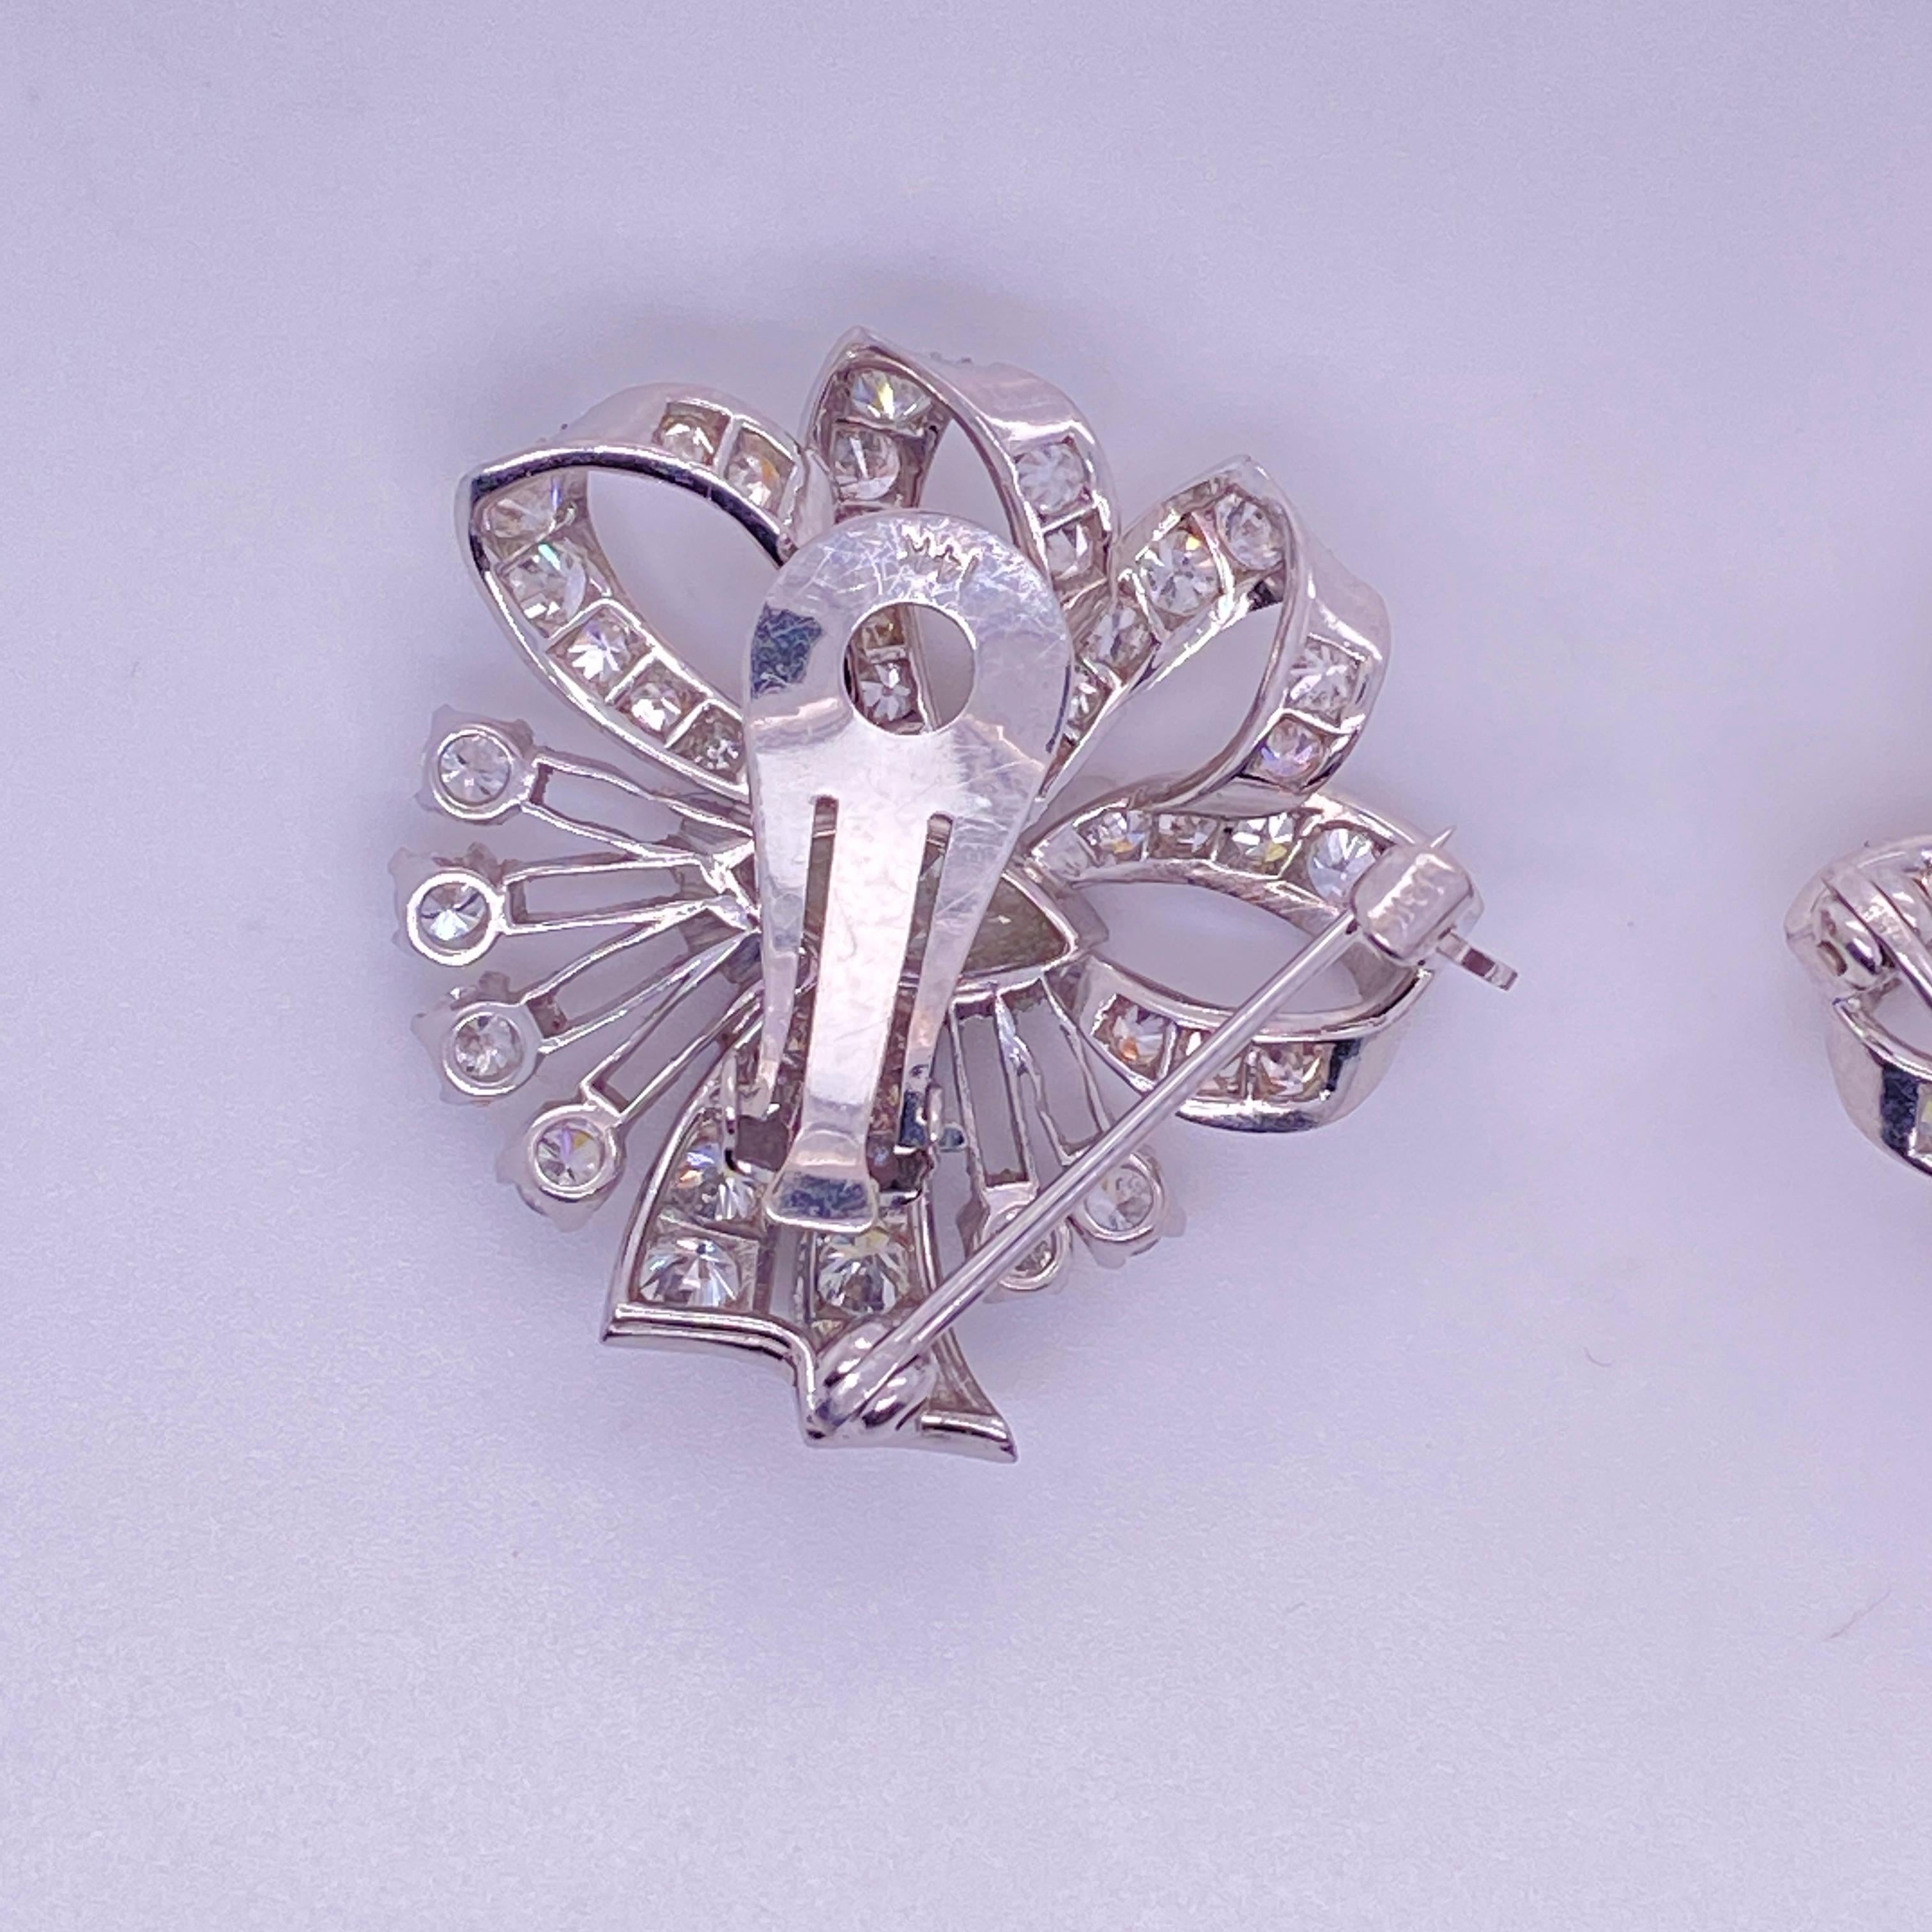 Edwardian, Cluster, Diamond Clip-On Earrings with Pin-Backs 2